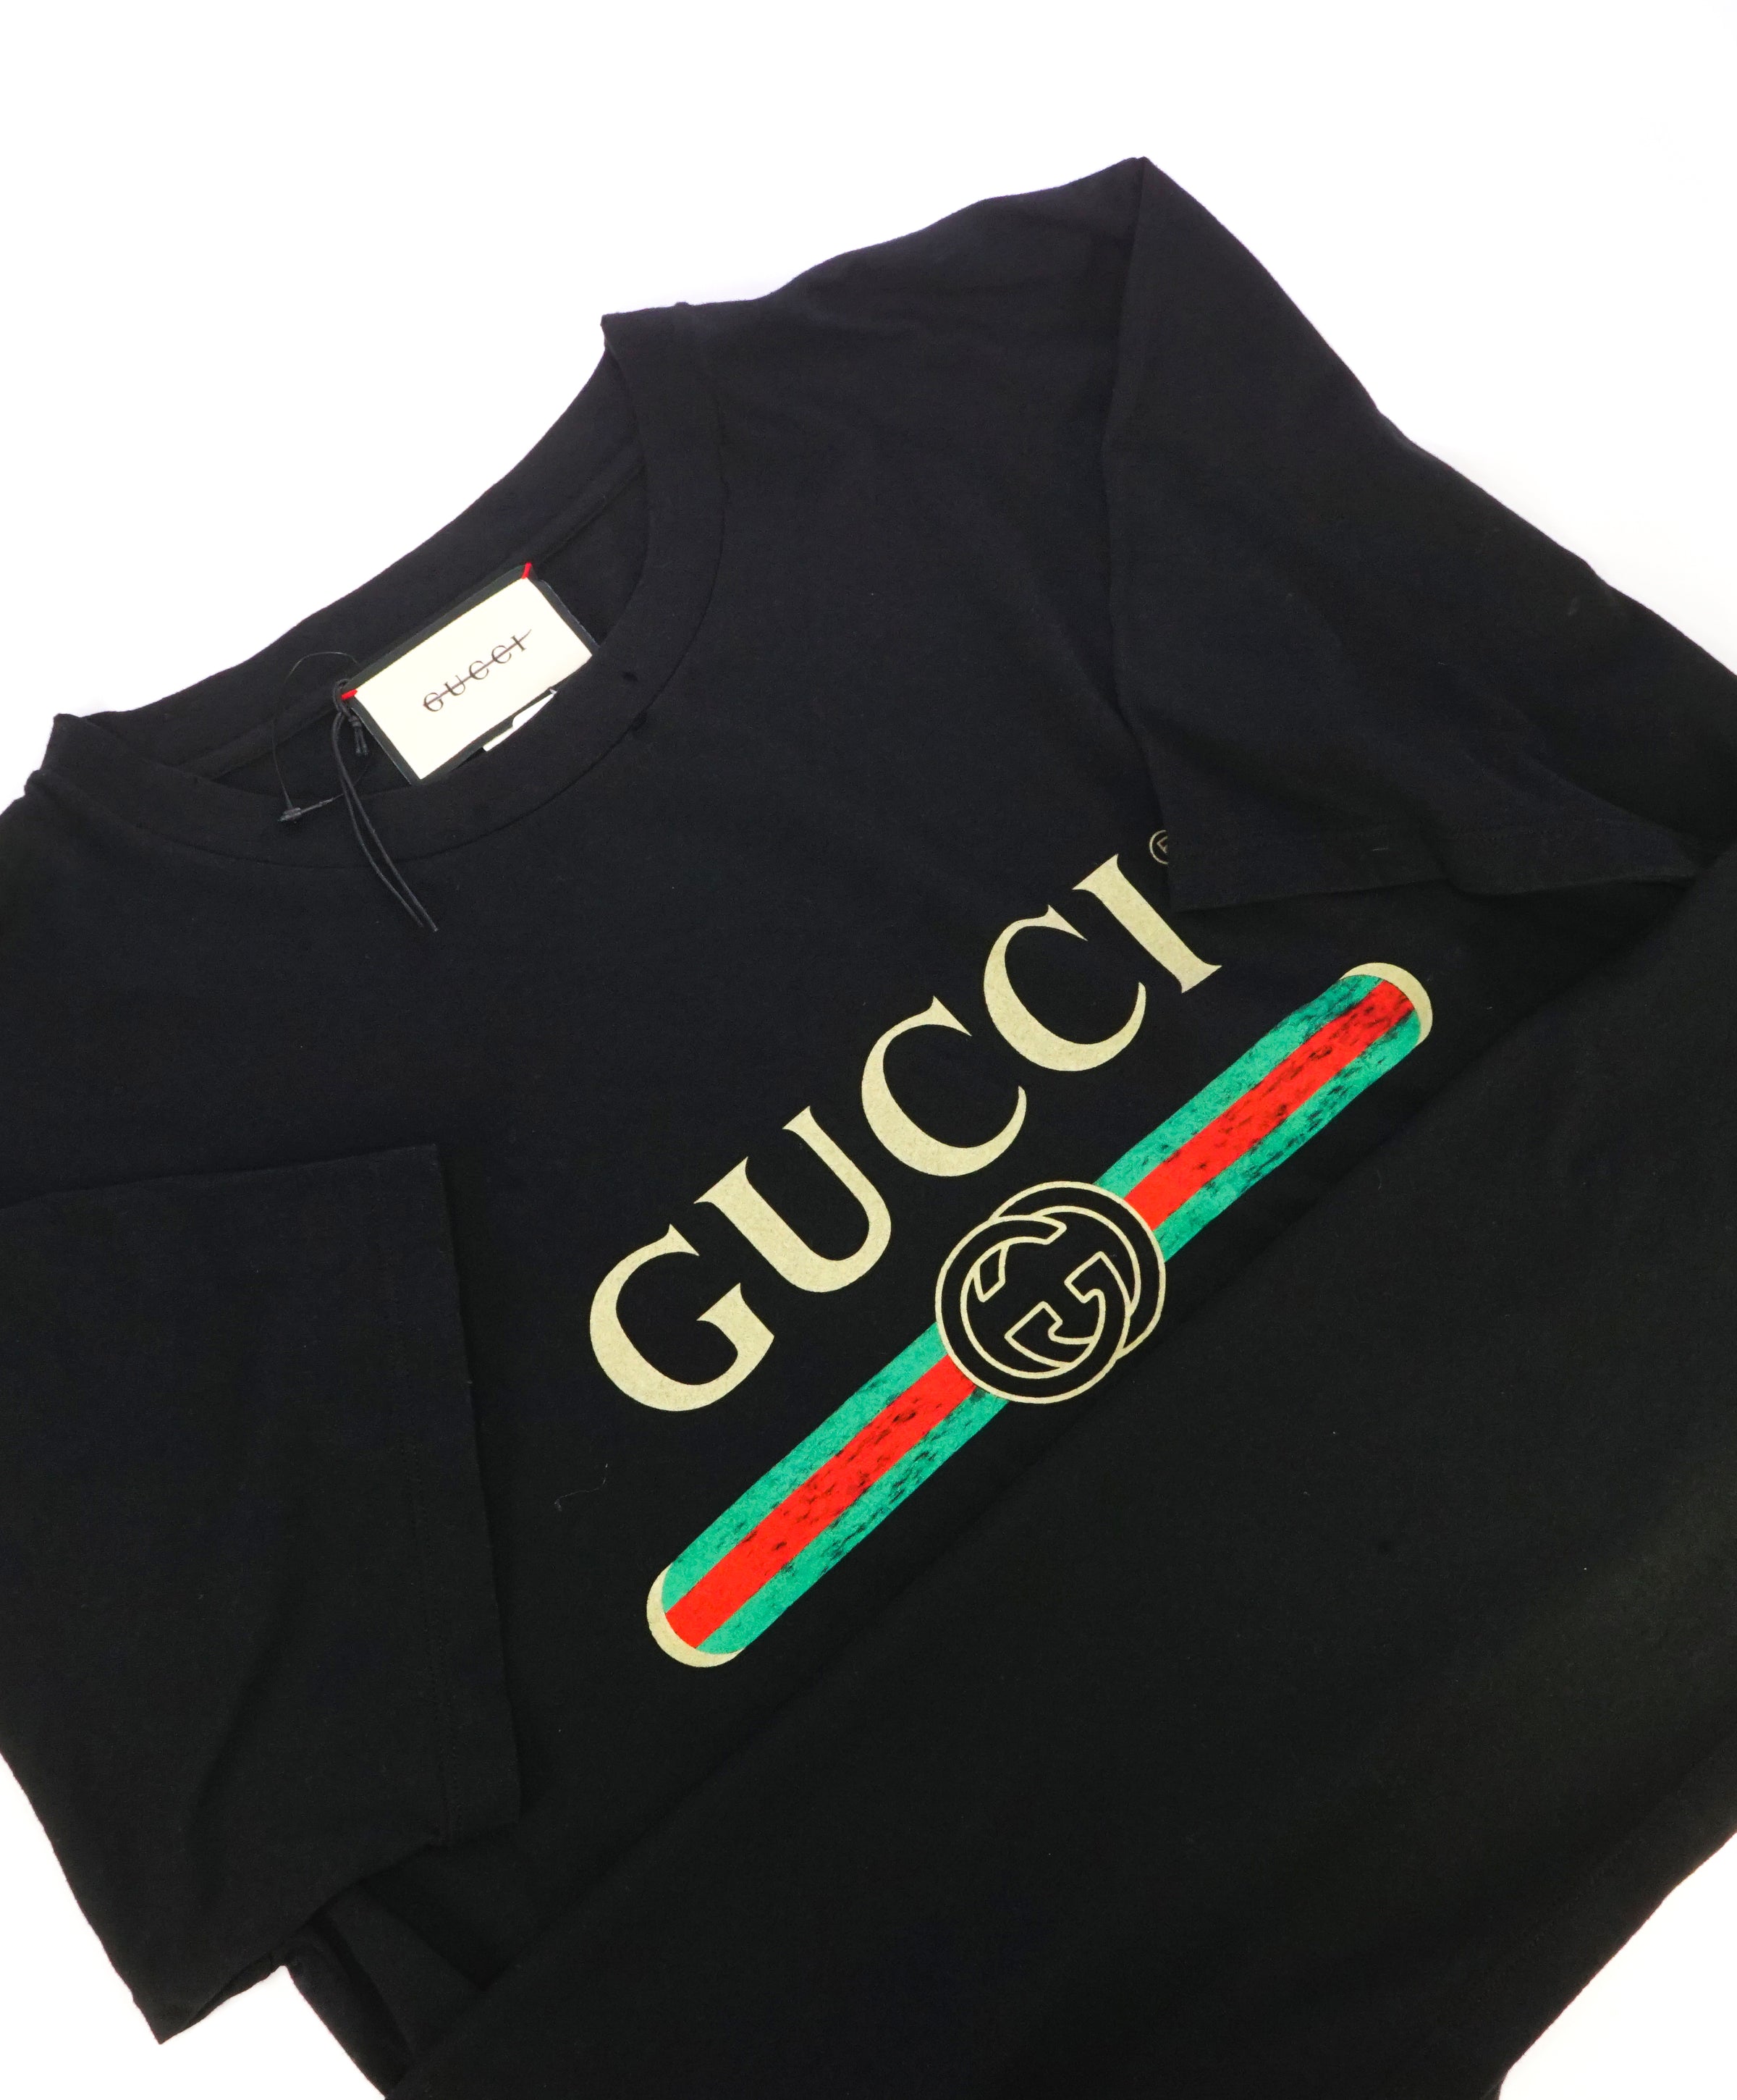 GUCCI - 1980 Vintage Style Oversize T-shirt with Gucci logo - M (Overs ...